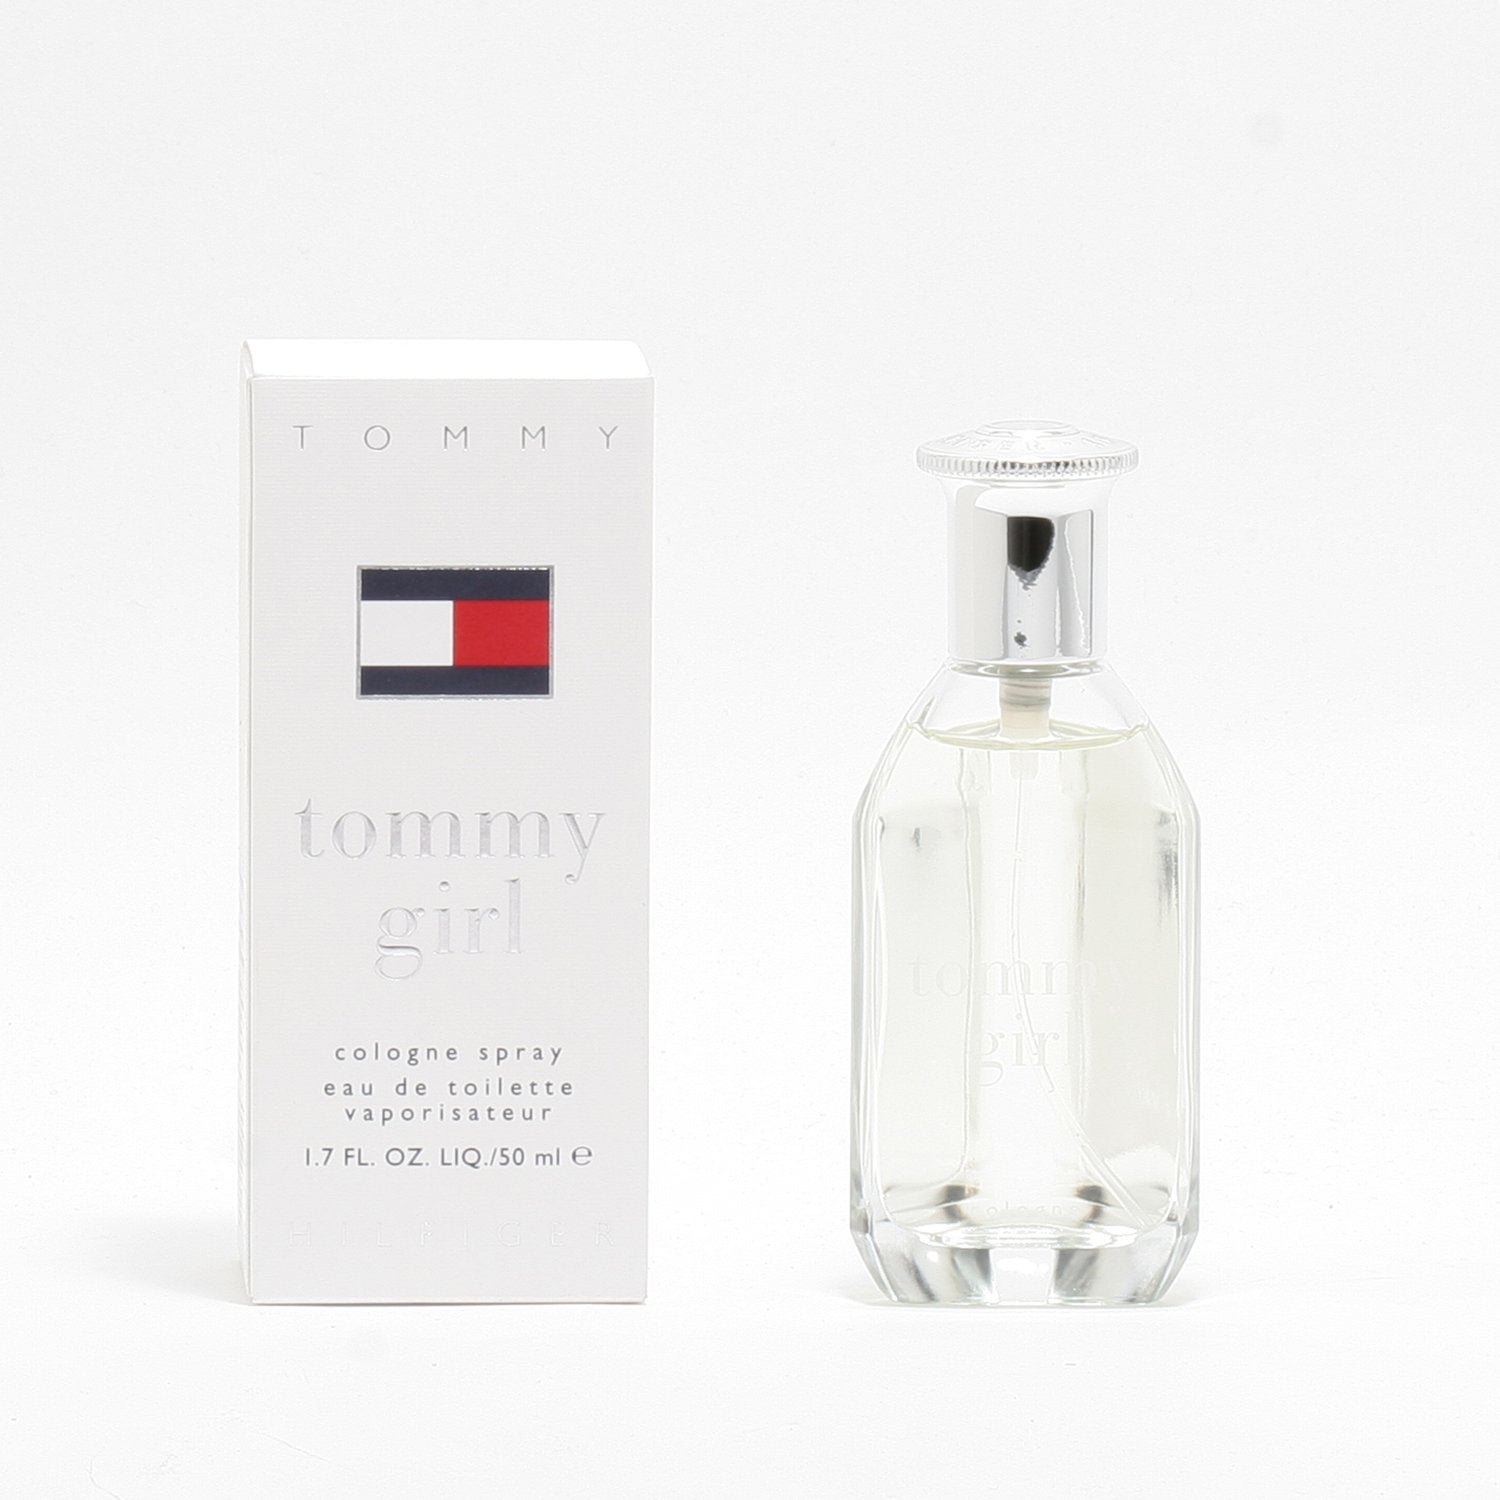 Tommy Hilfiger Perfume for Women